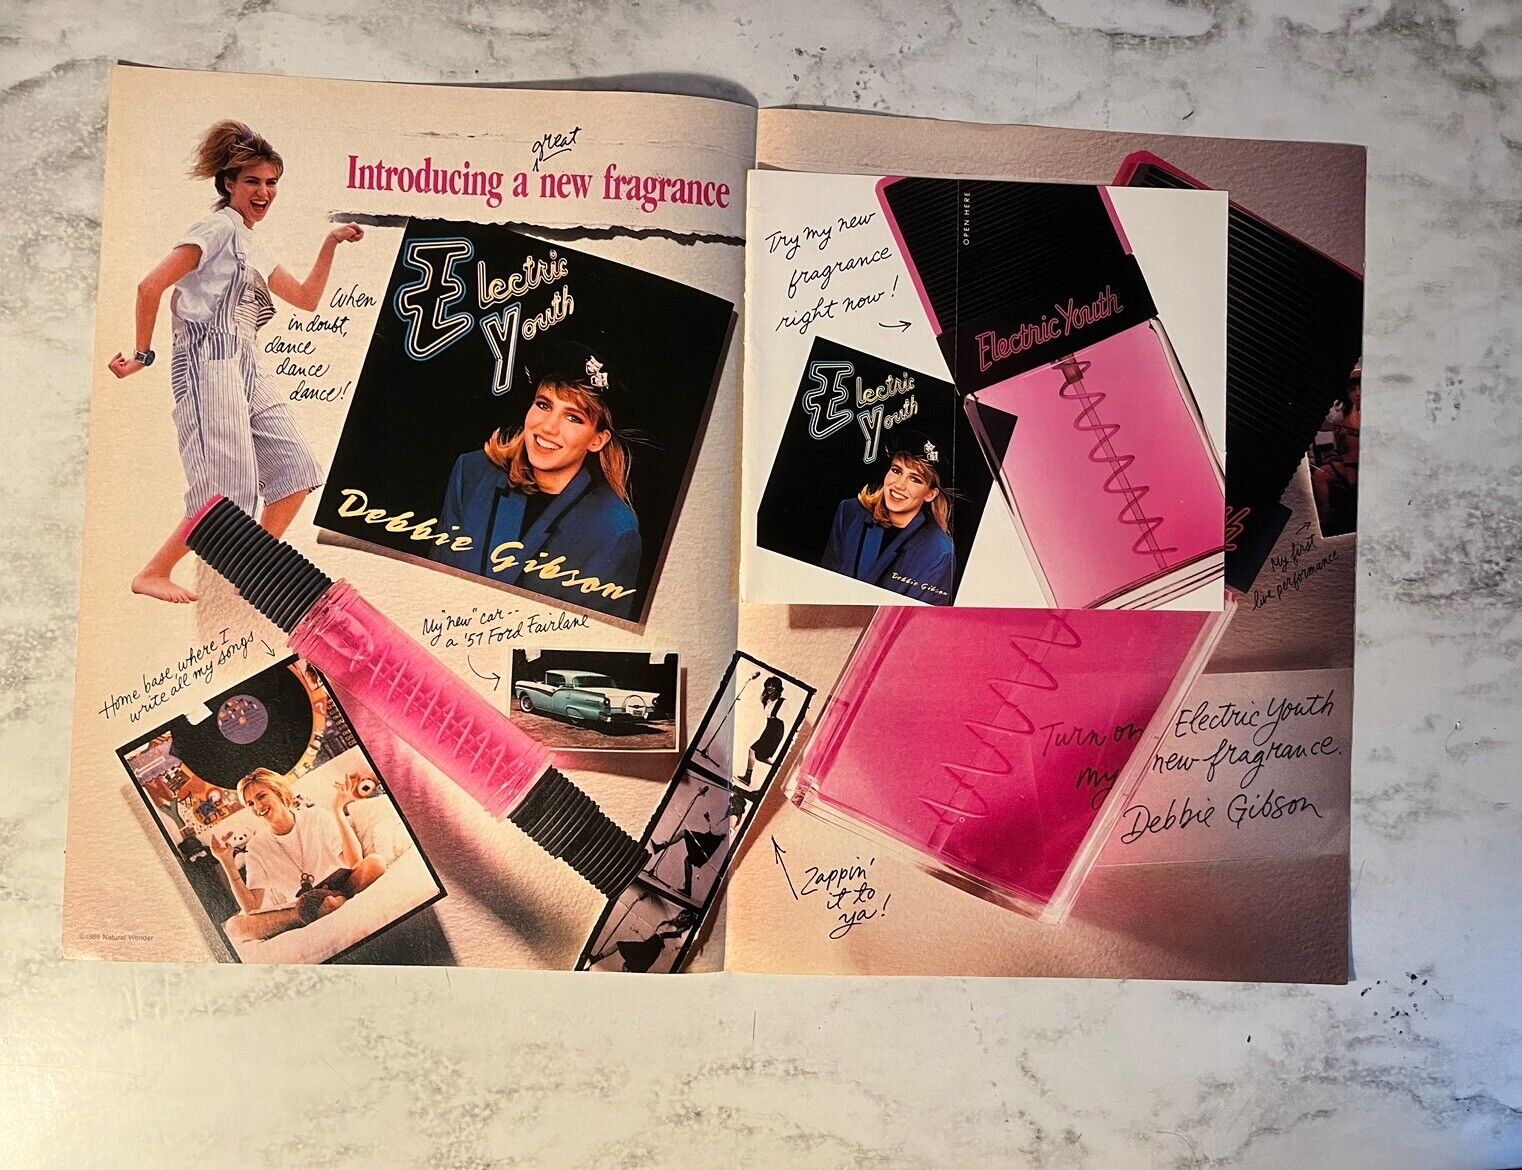 Vintage 1989 Debbie Gibson Electric Youth Perfume Ad From 80’s Teen Magazine.